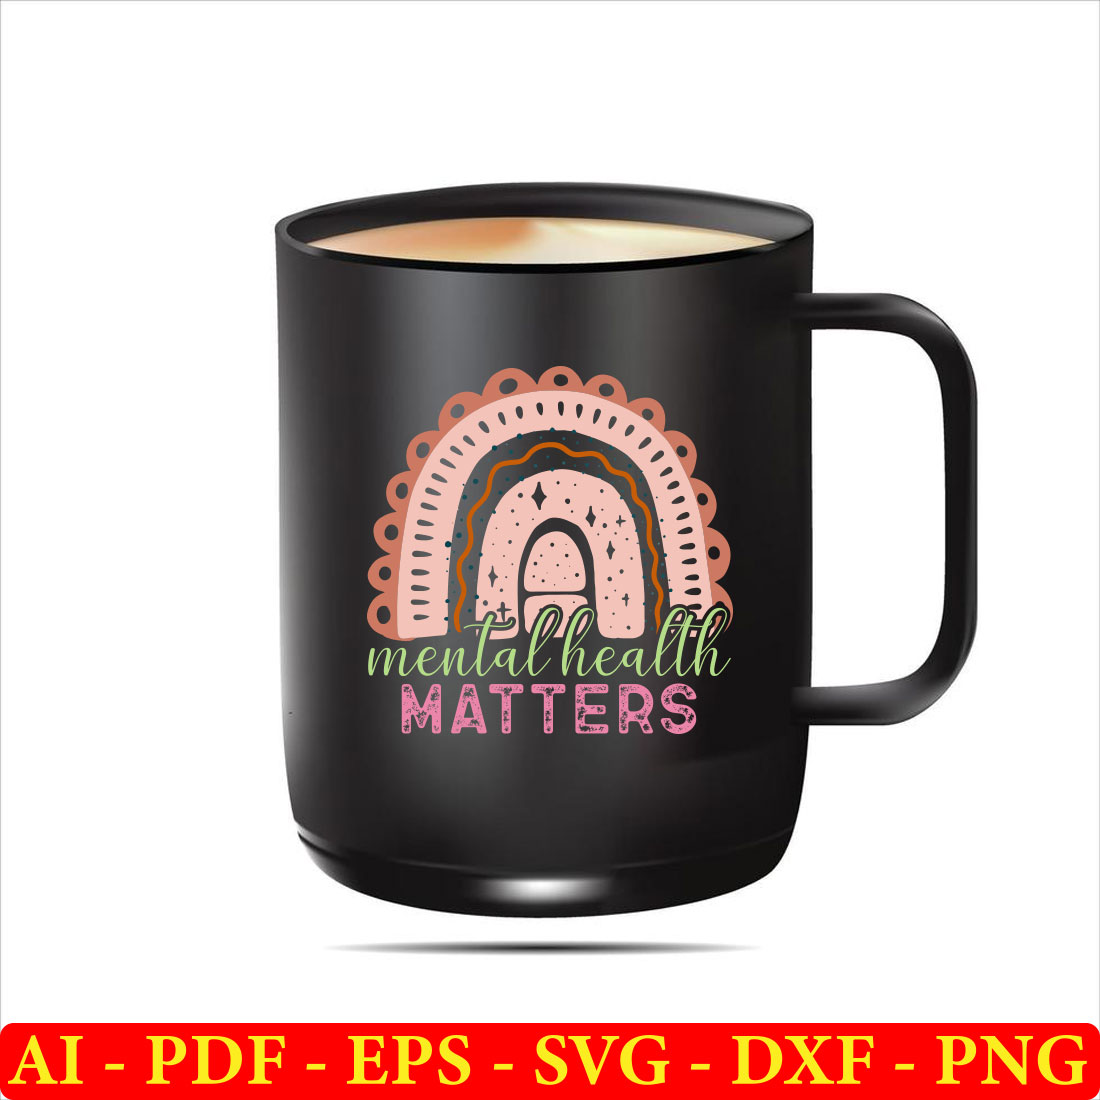 Black mug with the words mental health matters on it.